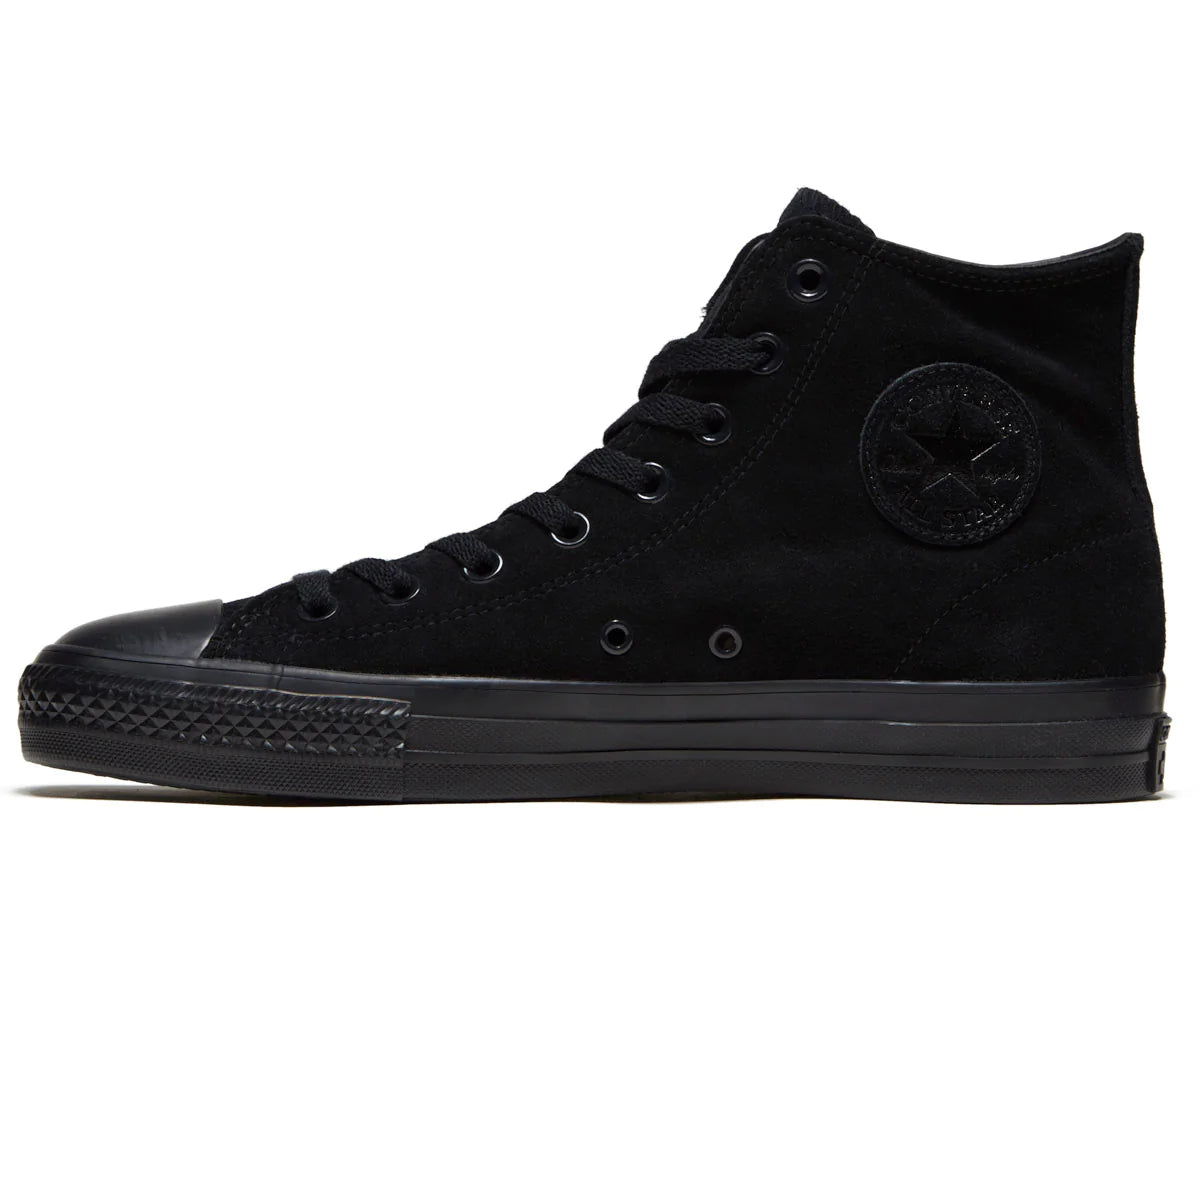 Converse Chuck Taylor All Star Pro Suede Hi Shoes